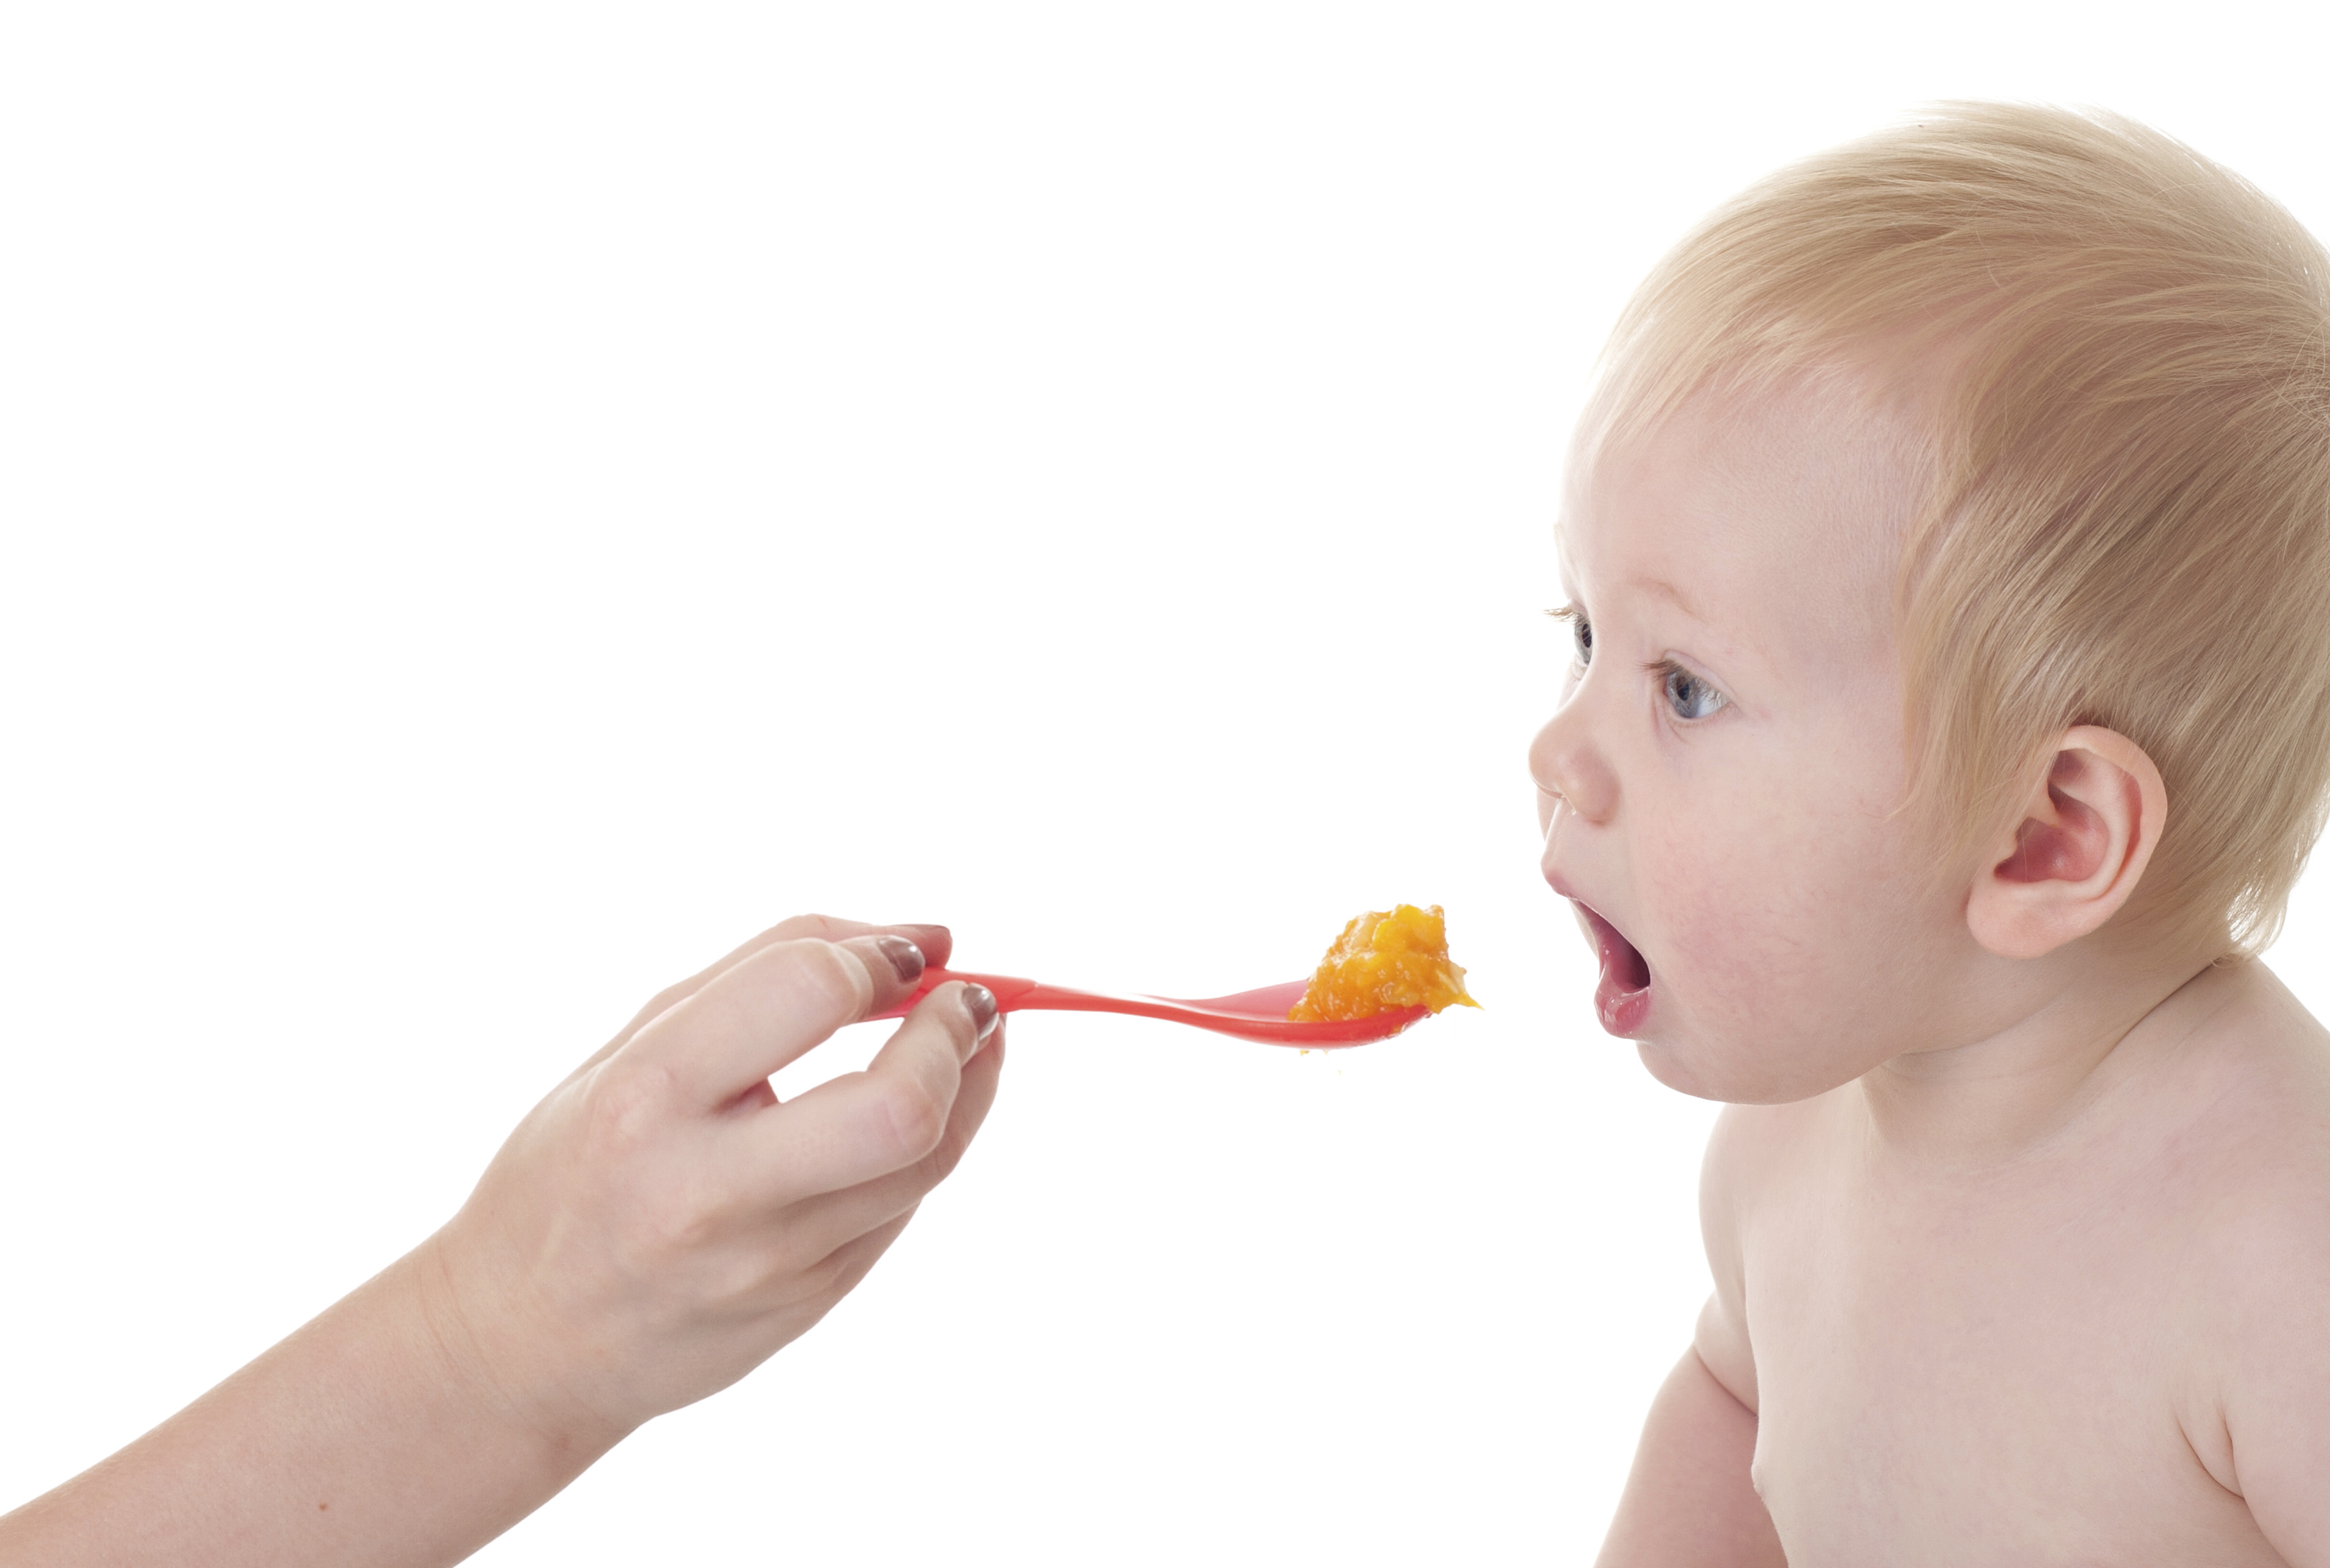 Feed in the right way for your child's stage of development